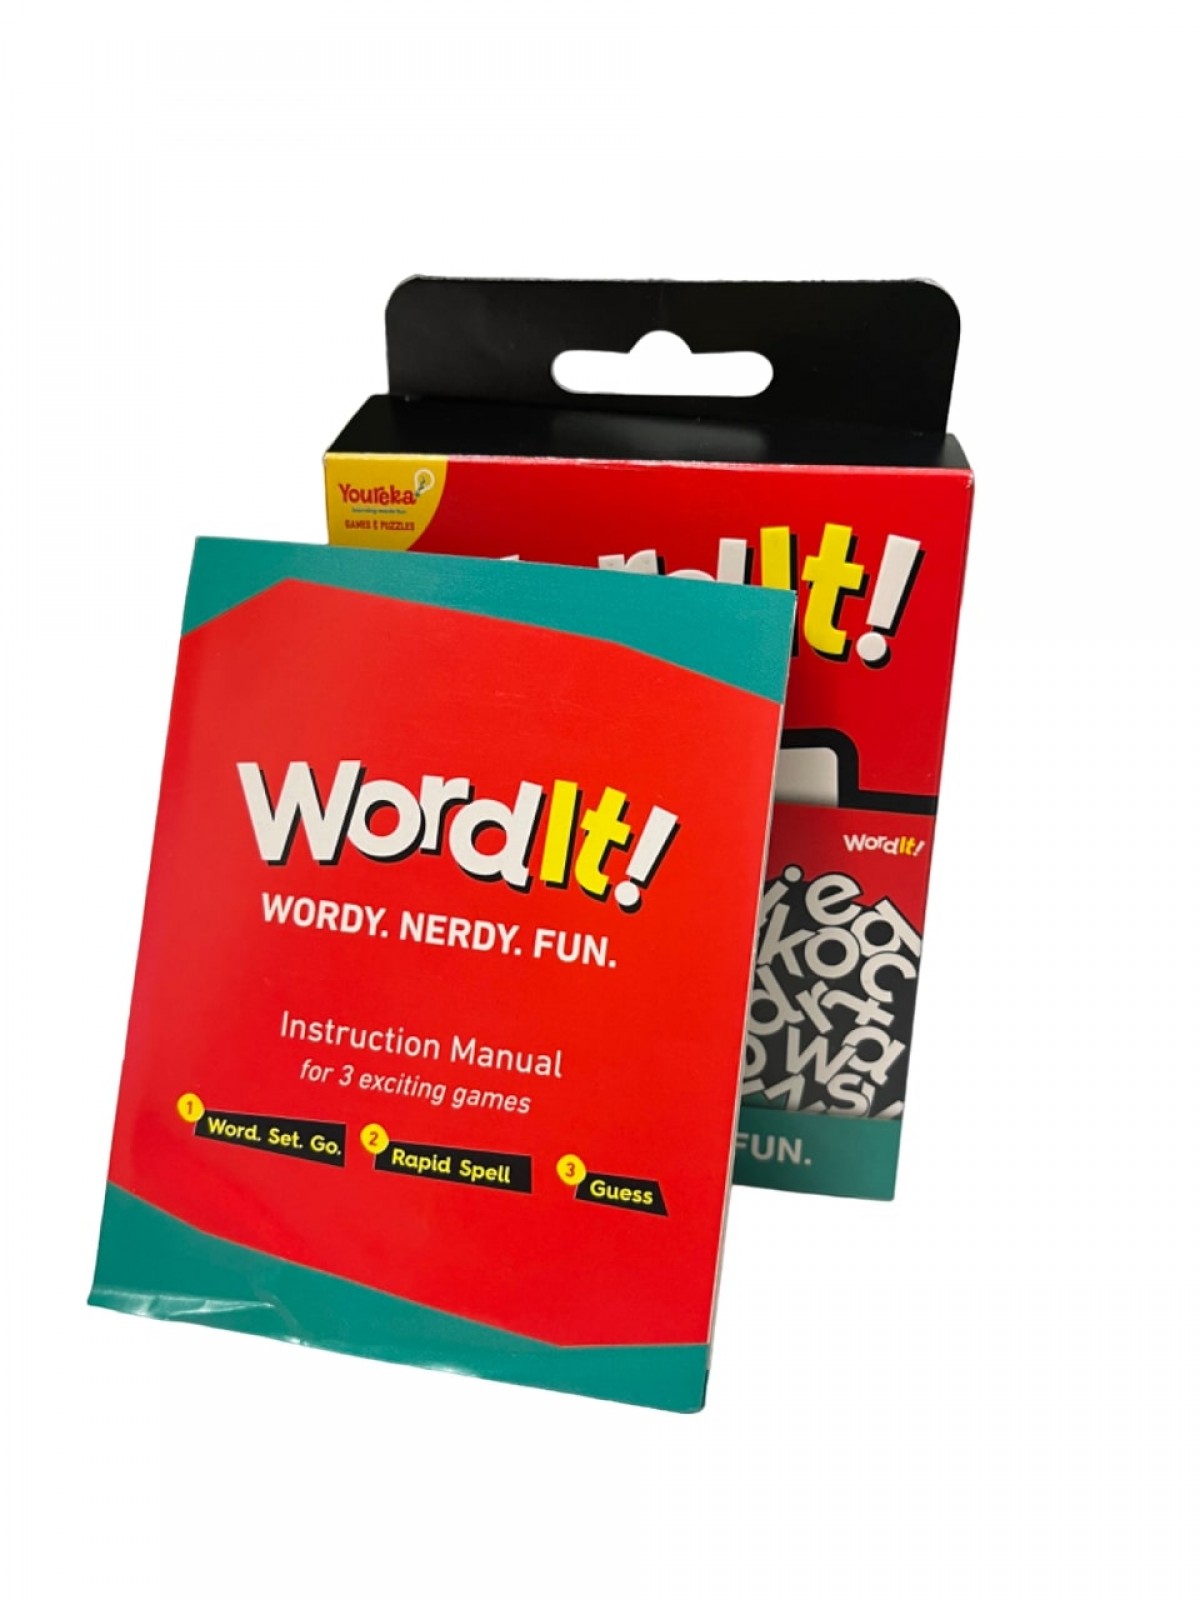 Youreka WordIt-Wordy Nerdy Fun, Games and Puzzles, 3 Games in 1, 2-4 Players, Multicolour, Age 8 yrs+